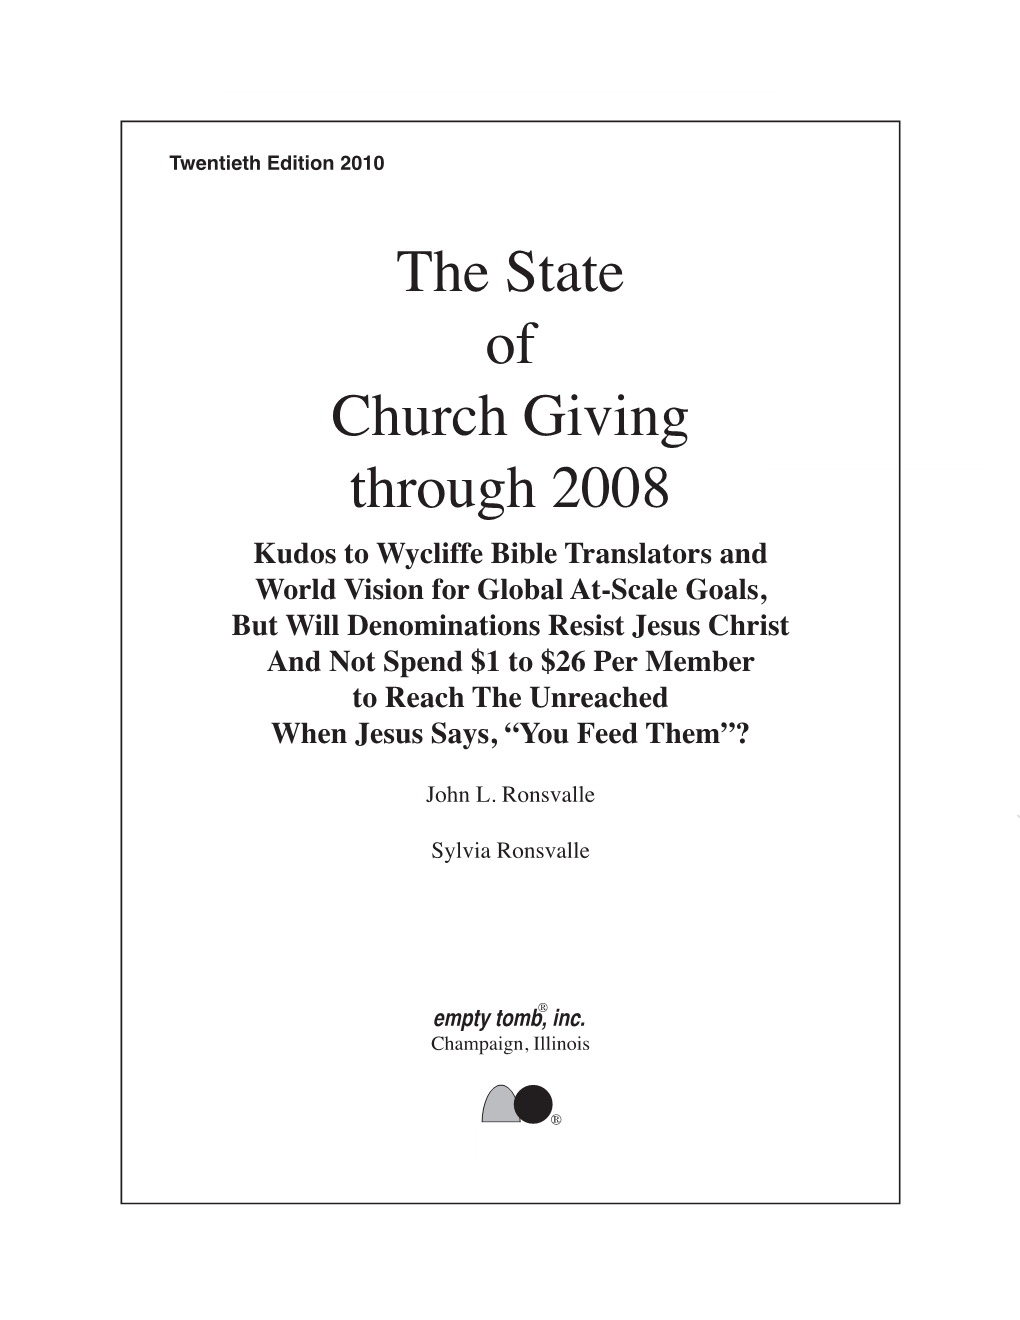 The State of Church Giving Through 2008